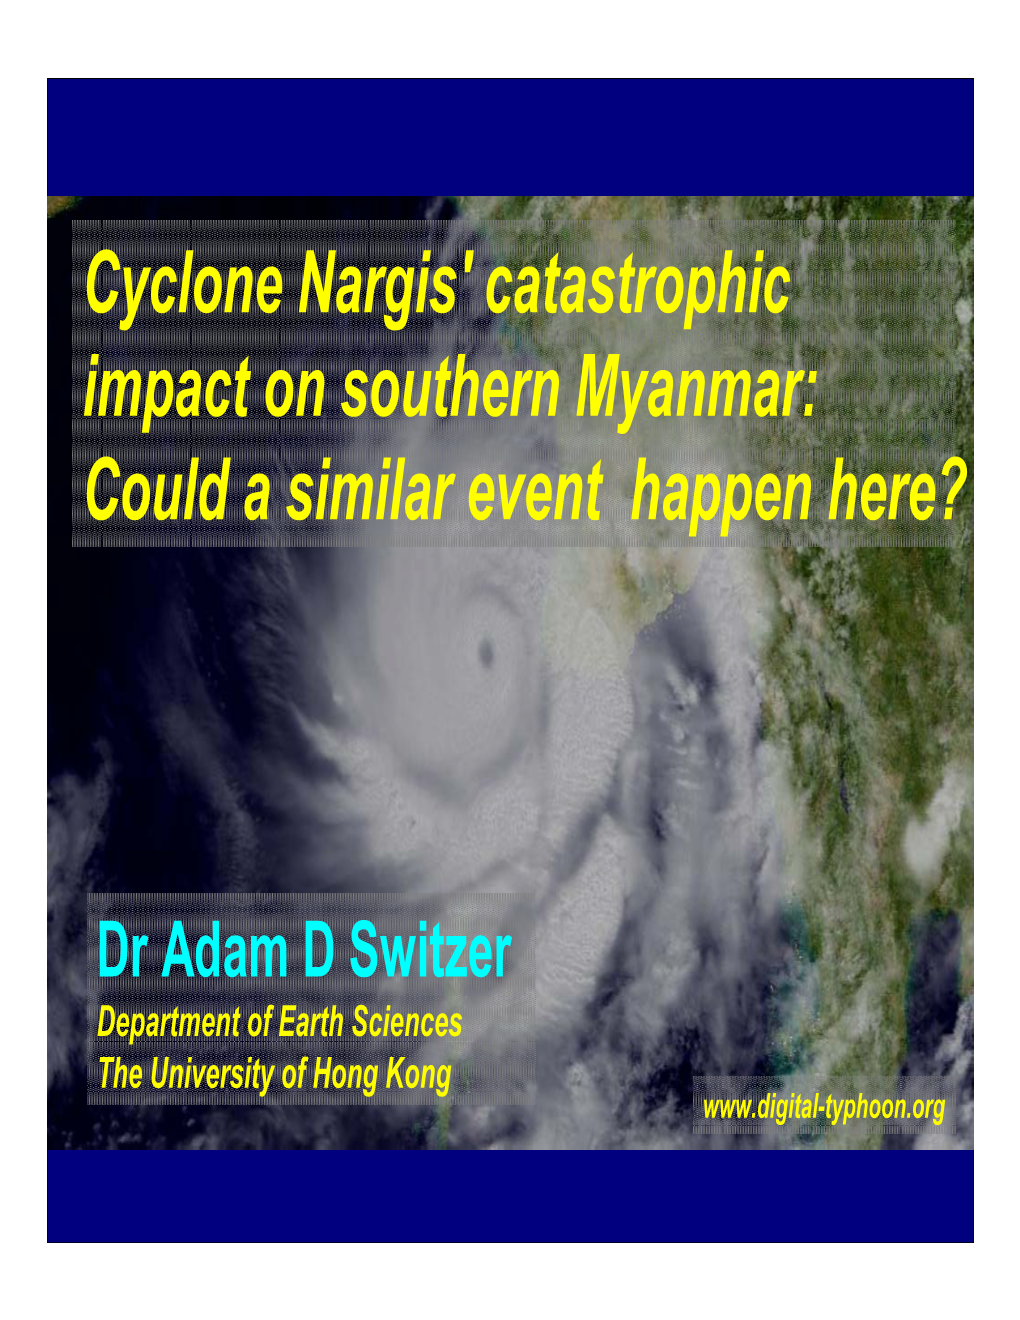 Cyclone Nargis' Catastrophic Impact on Southern Myanmar: Could a Similar Event Happen Here?